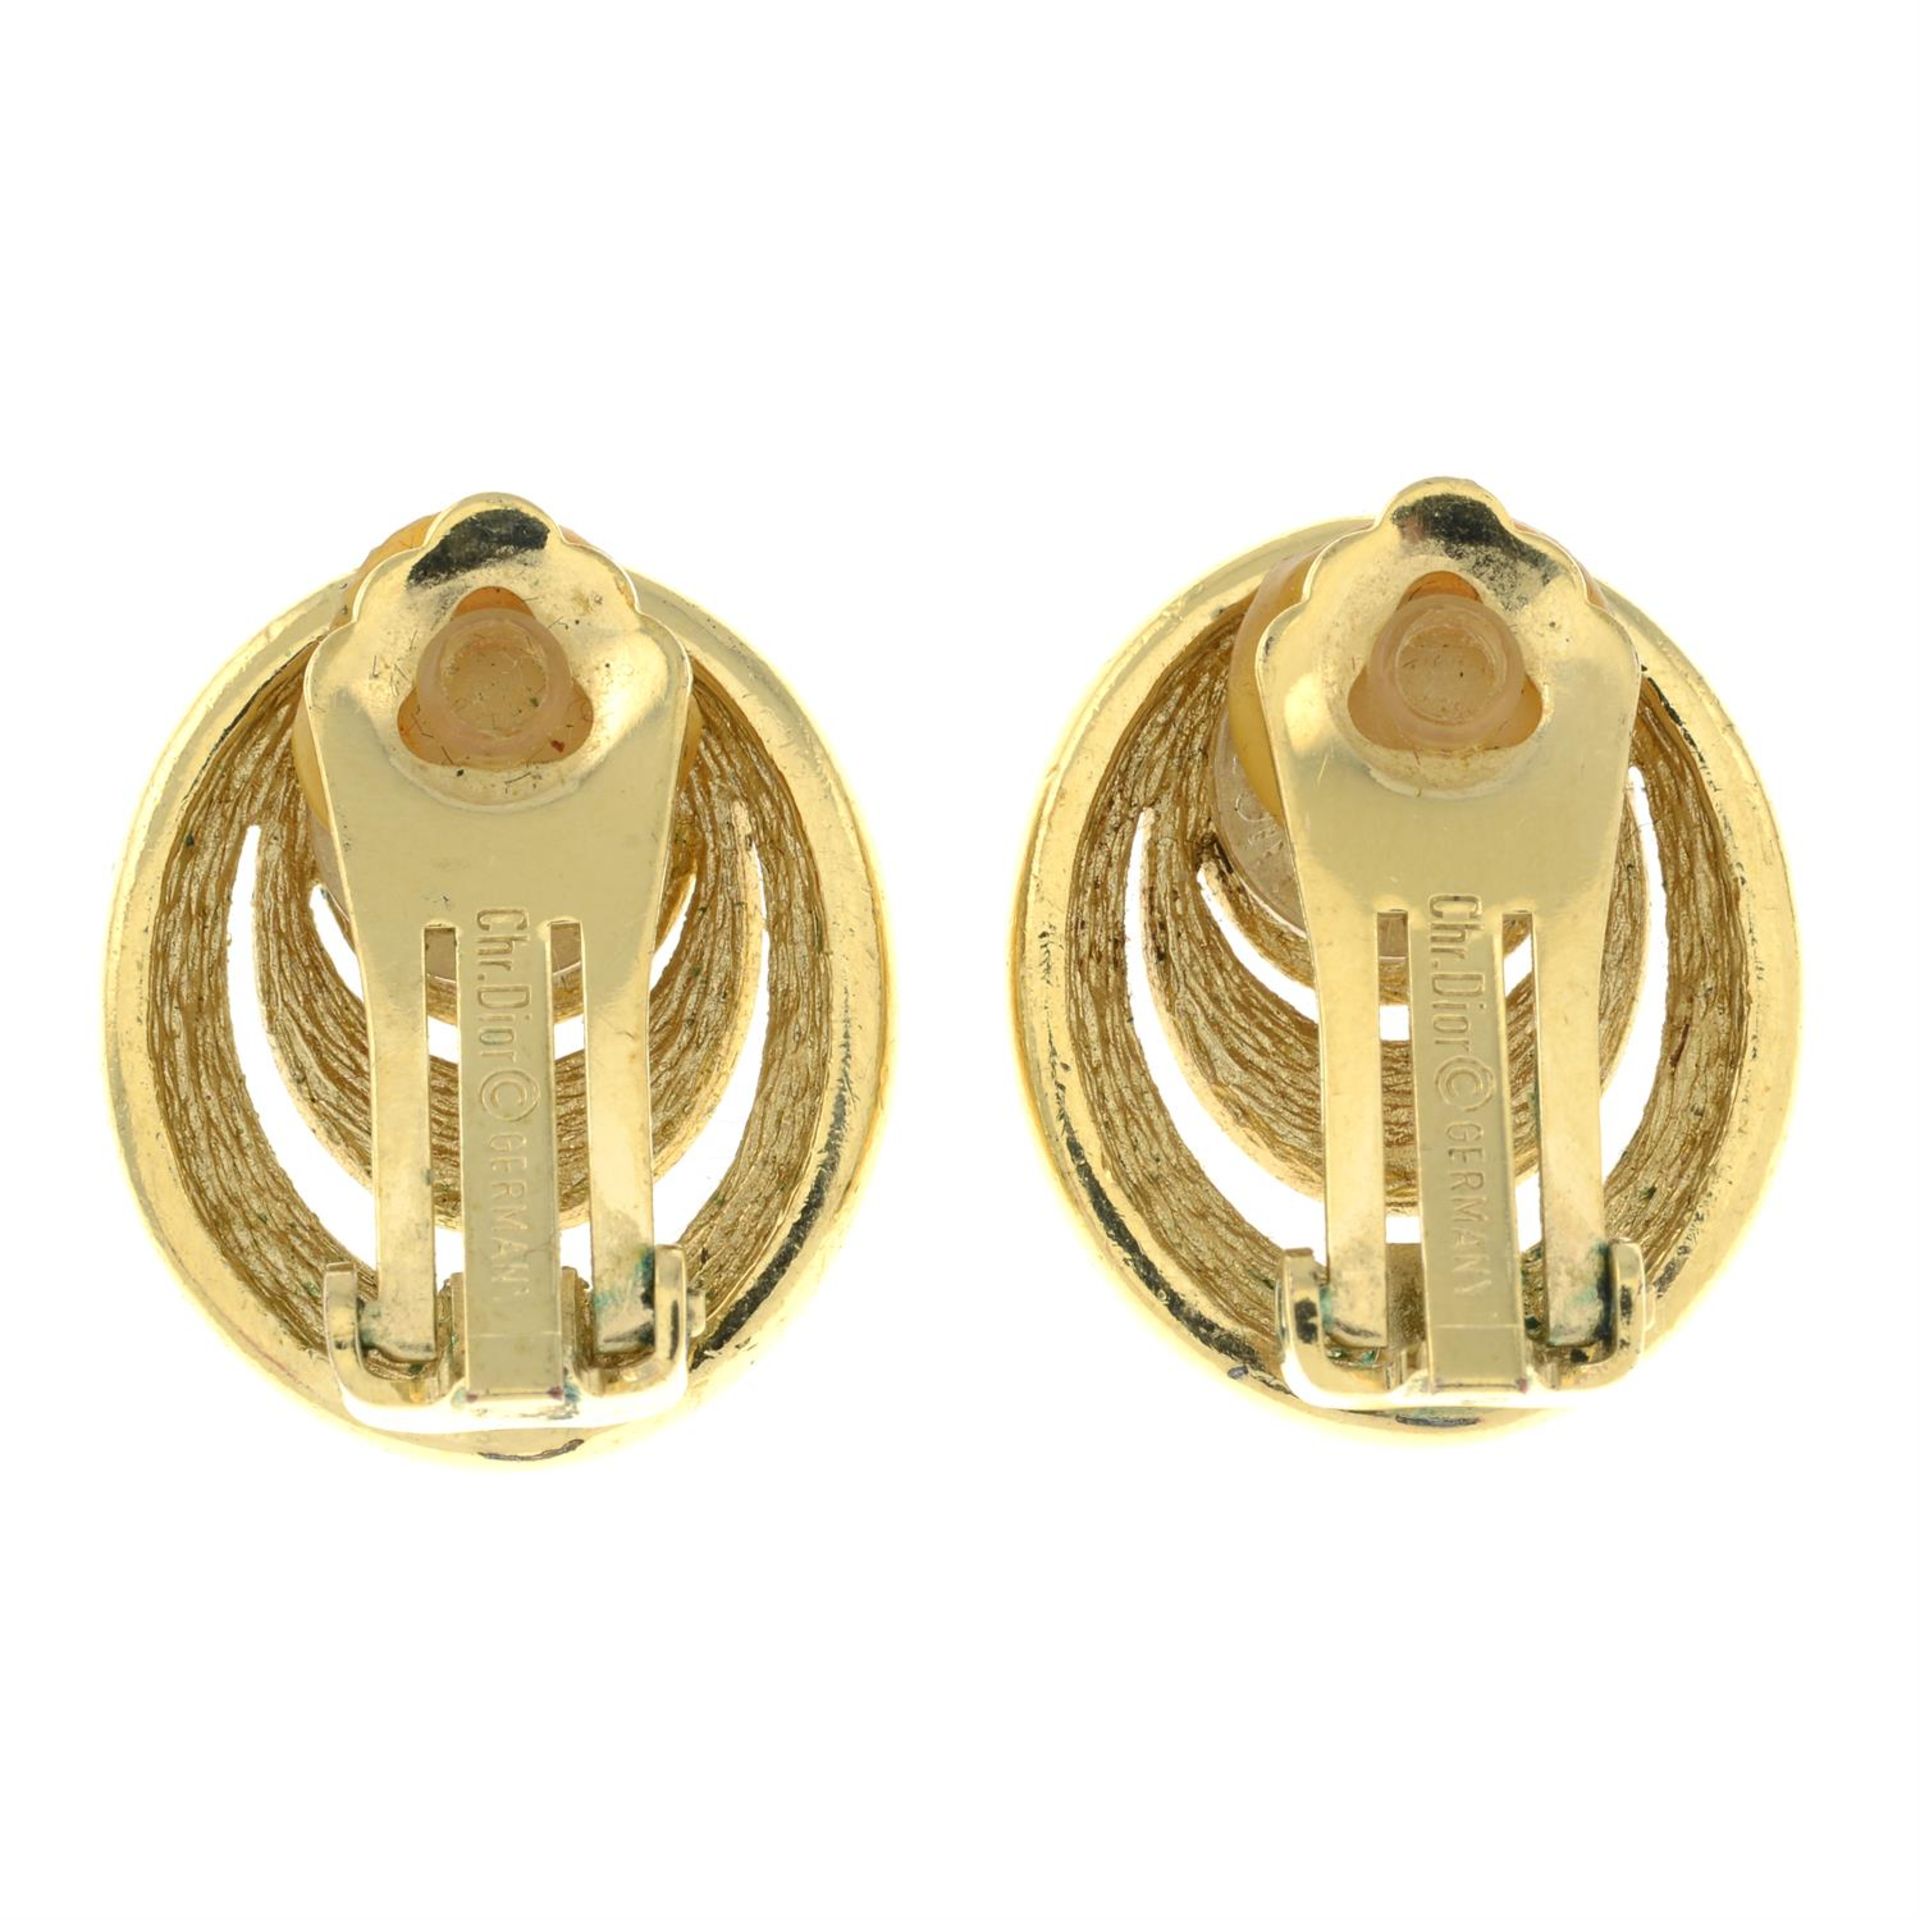 CHRISTIAN DIOR - a pair of clip-on earrings. - Image 2 of 2